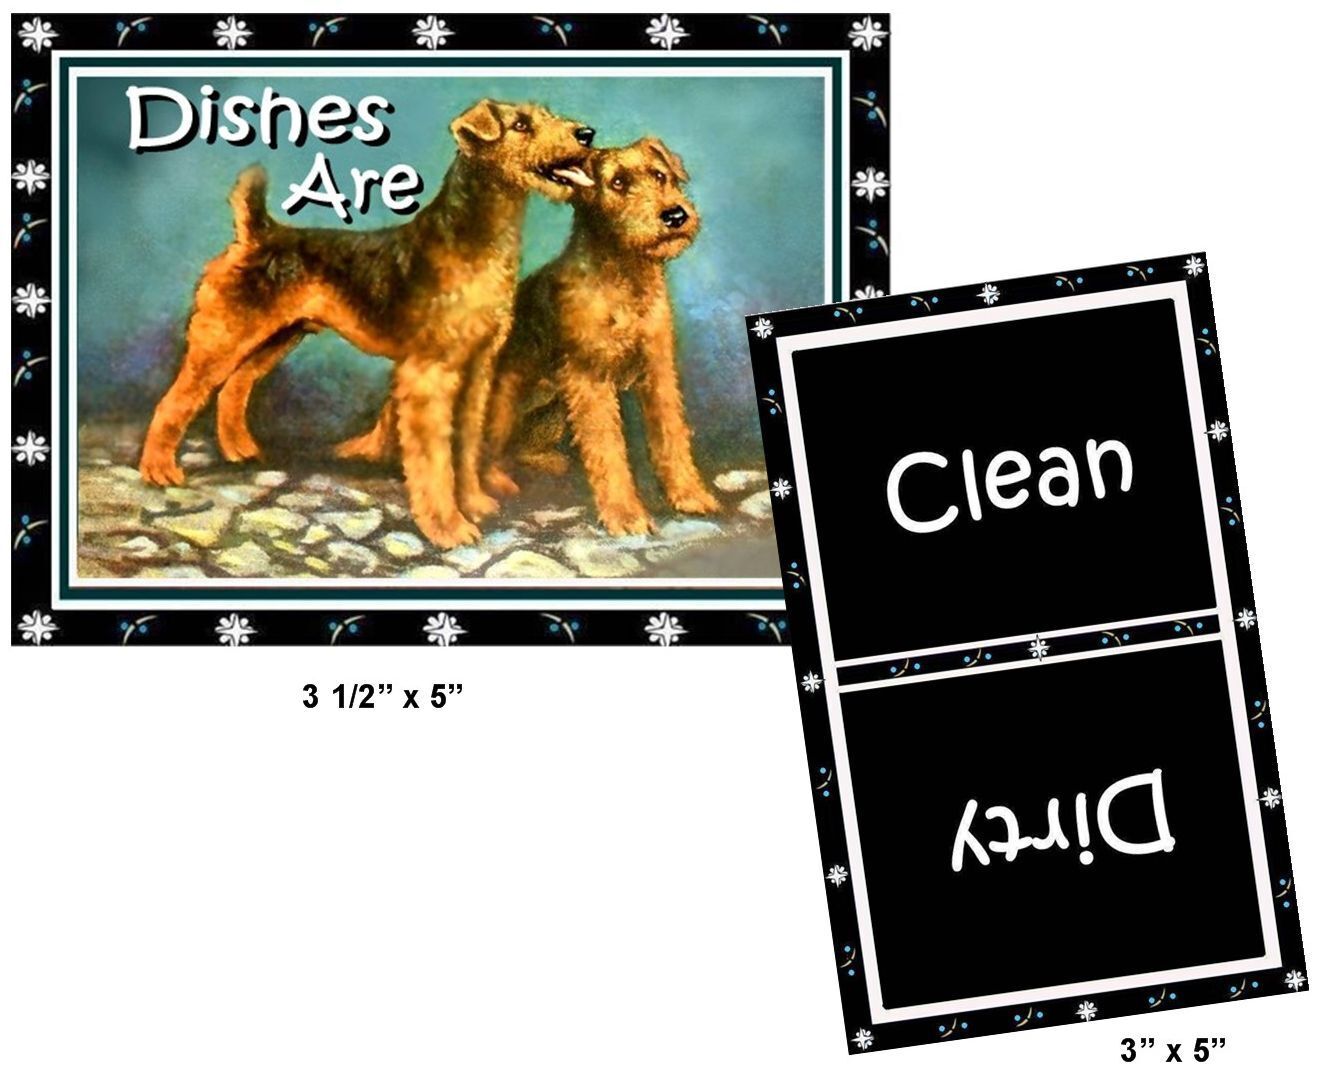 Dog Dishwasher Magnet (airedale Terriers) - Clean/dirty *ship Free